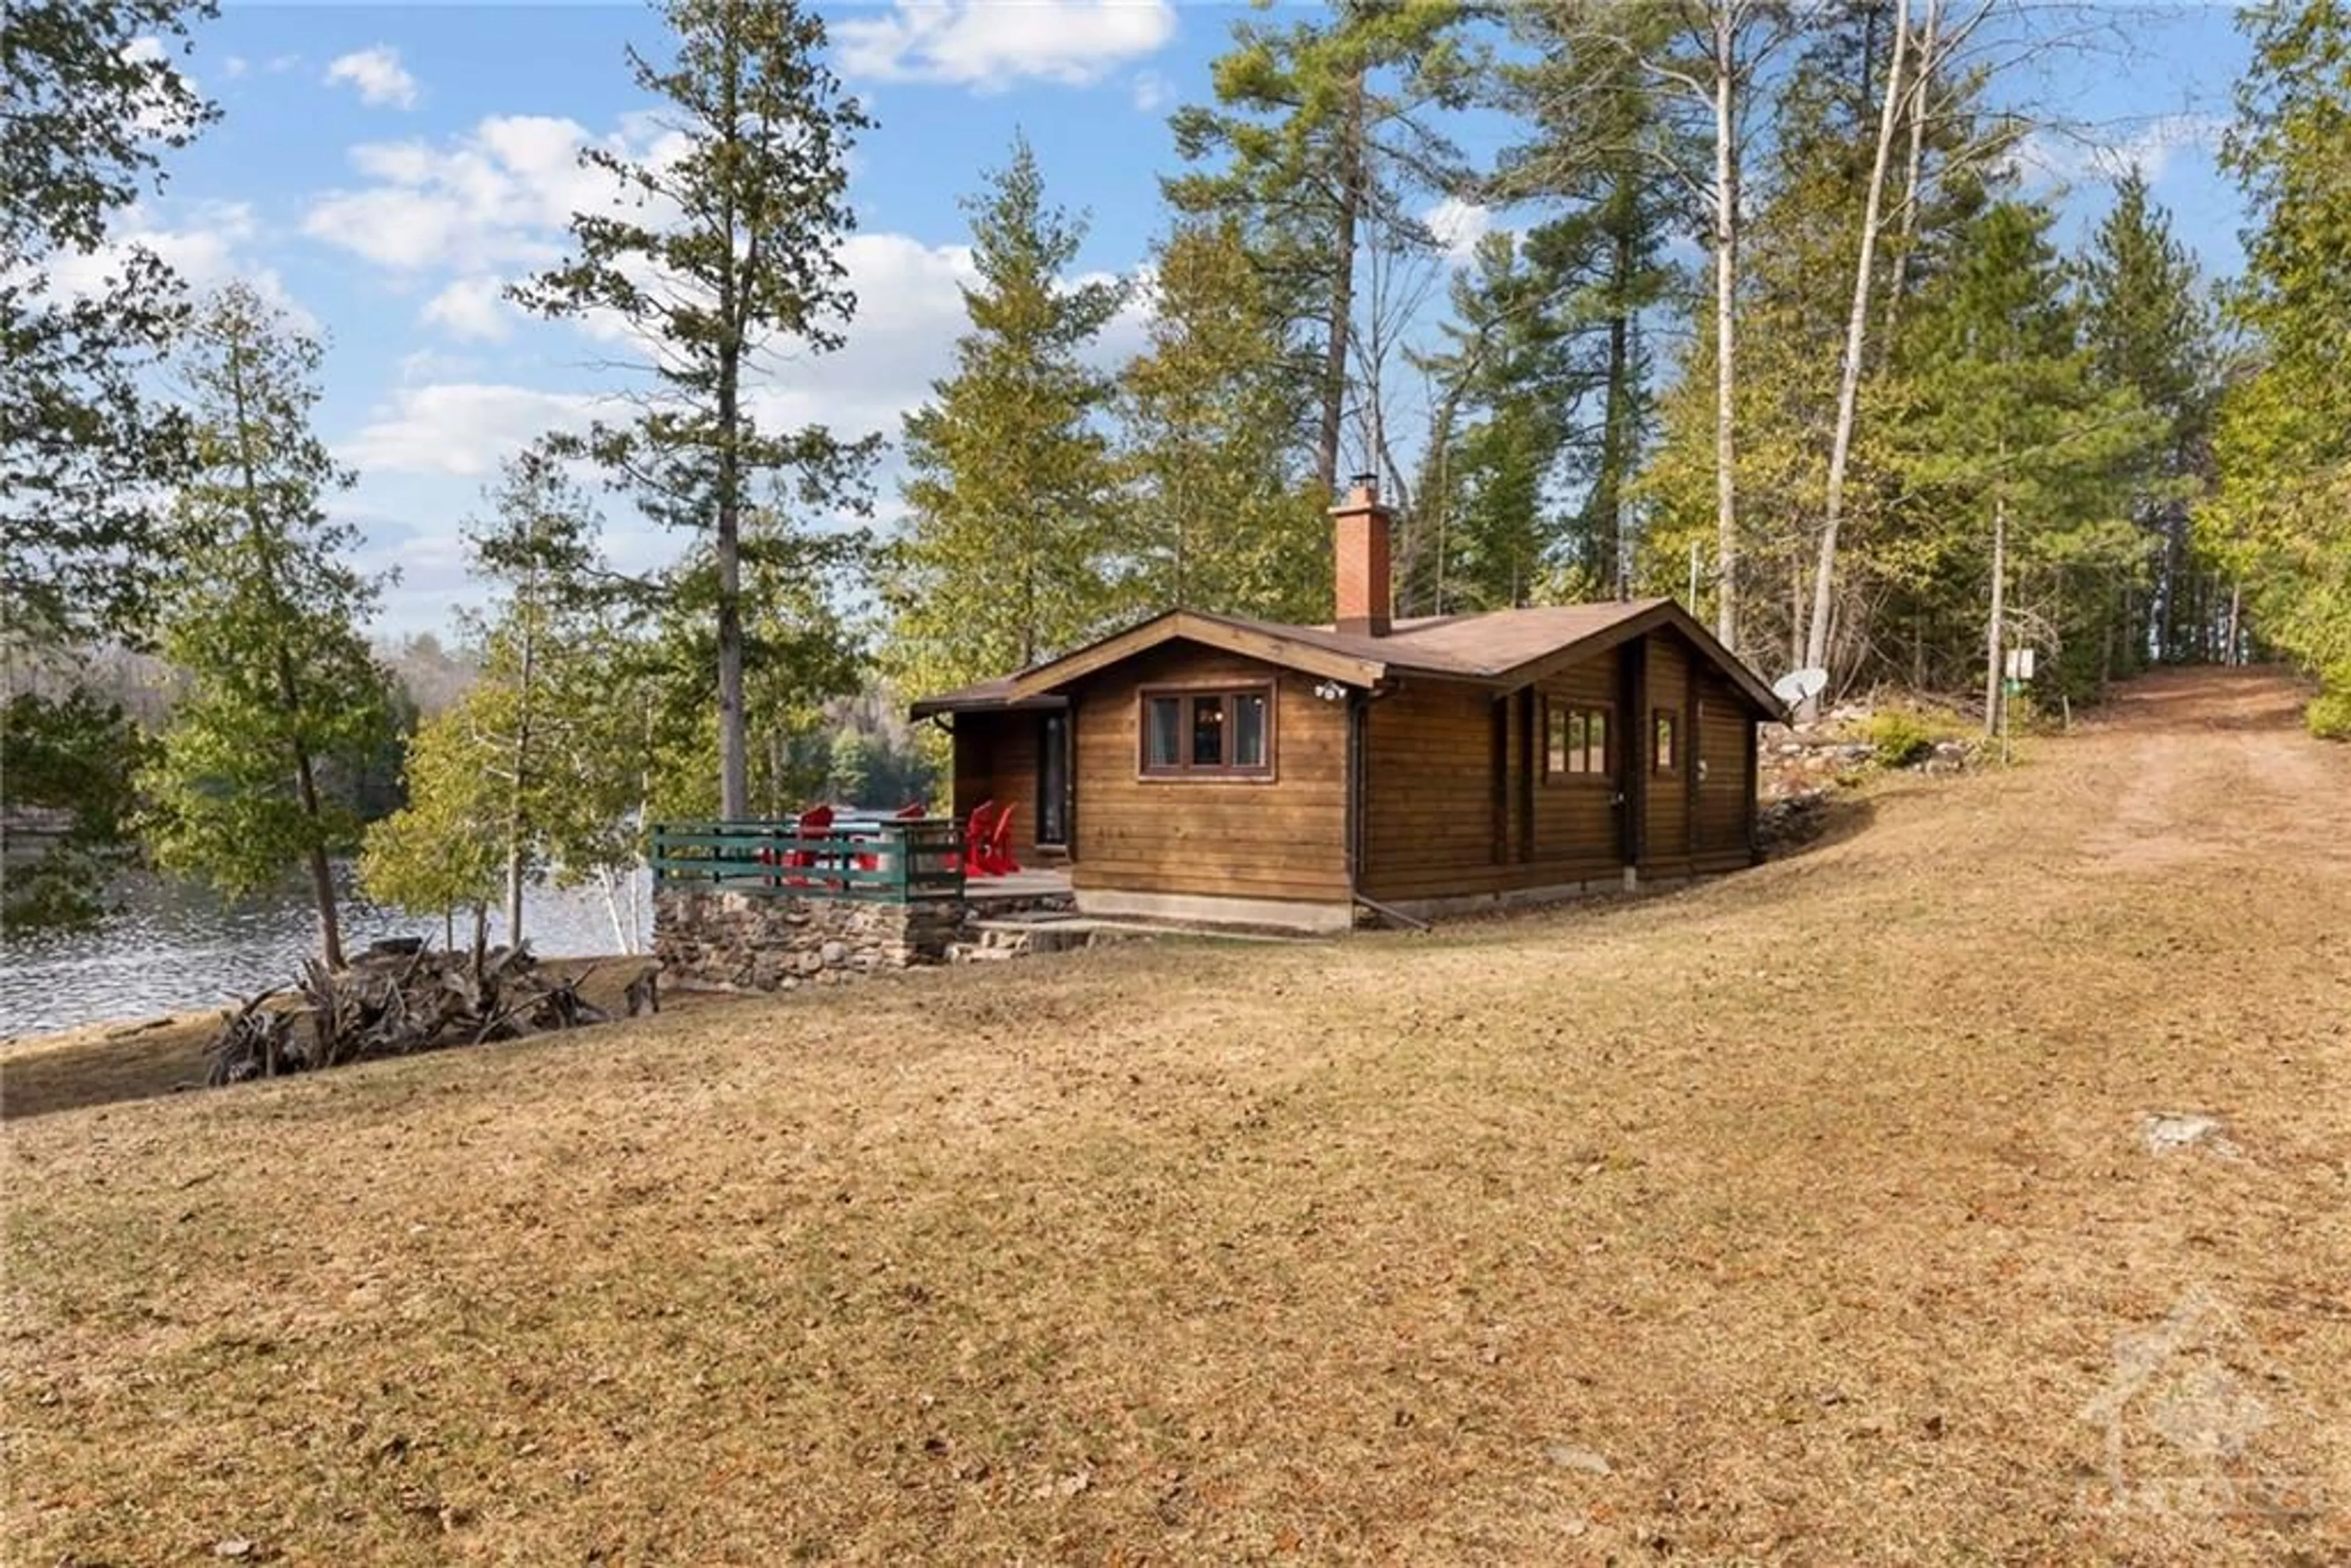 Cottage for 81 CAMEL CHUTE Lane, Griffith Ontario K0J 2R0